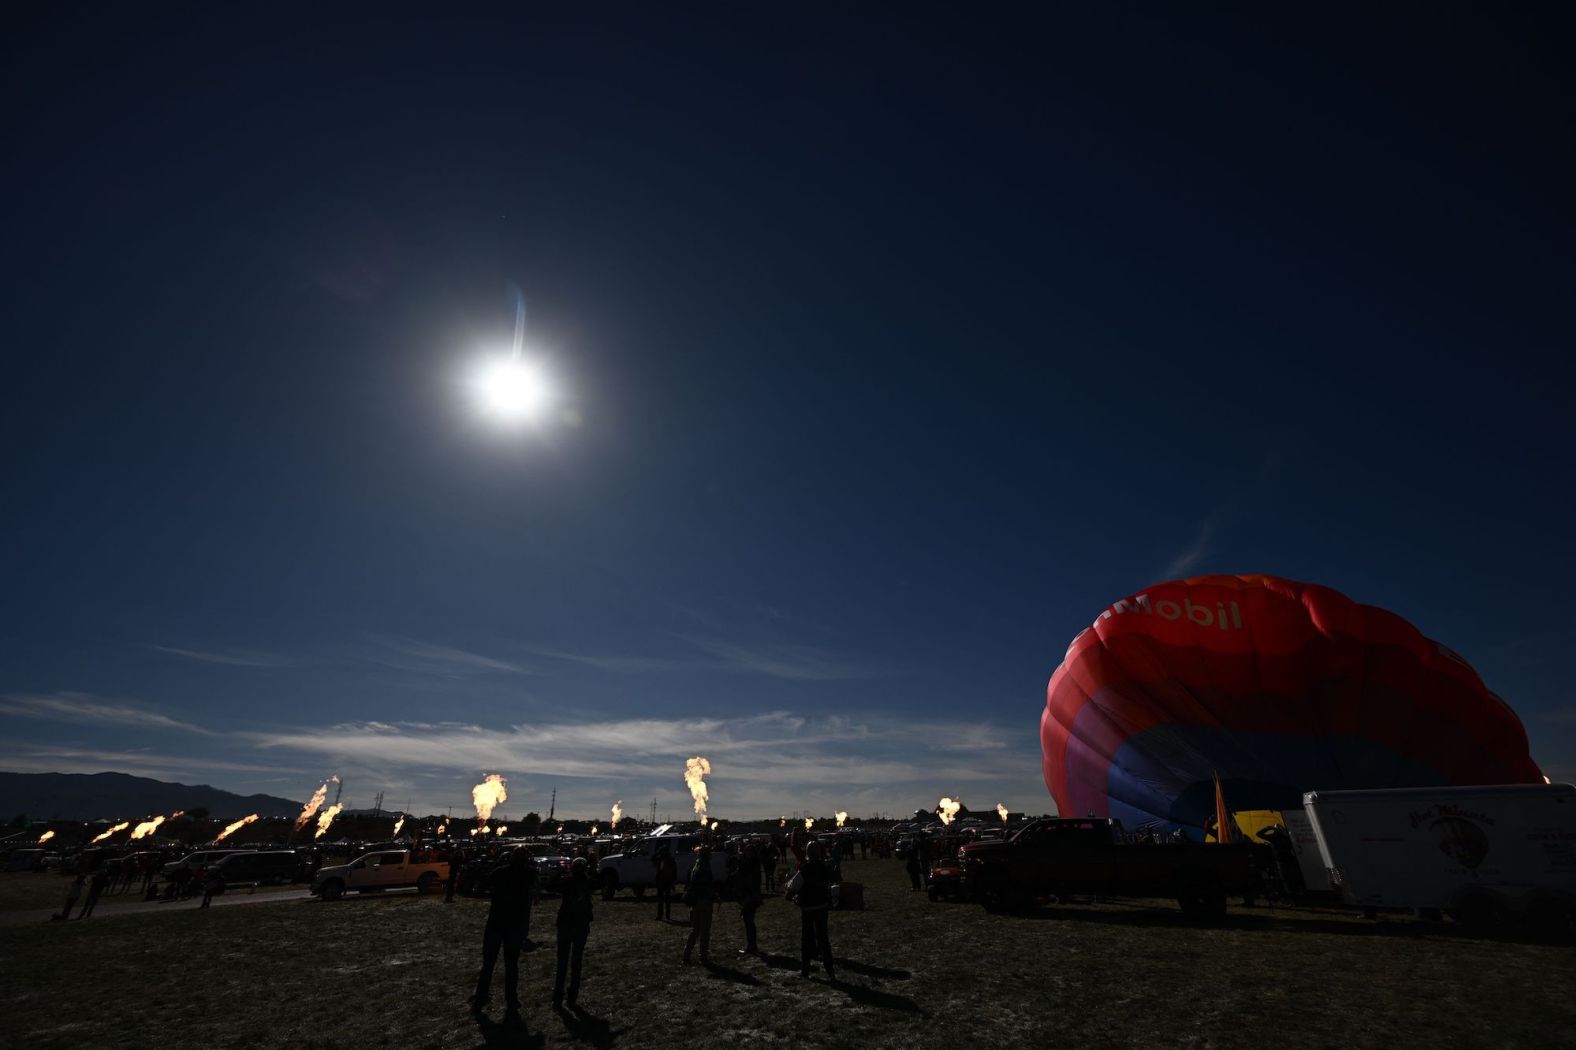 Hot air balloon operators create a "ring of fire" with their gondola burners at the Albuquerque International Balloon Fiesta in Albuquerque, New Mexico.